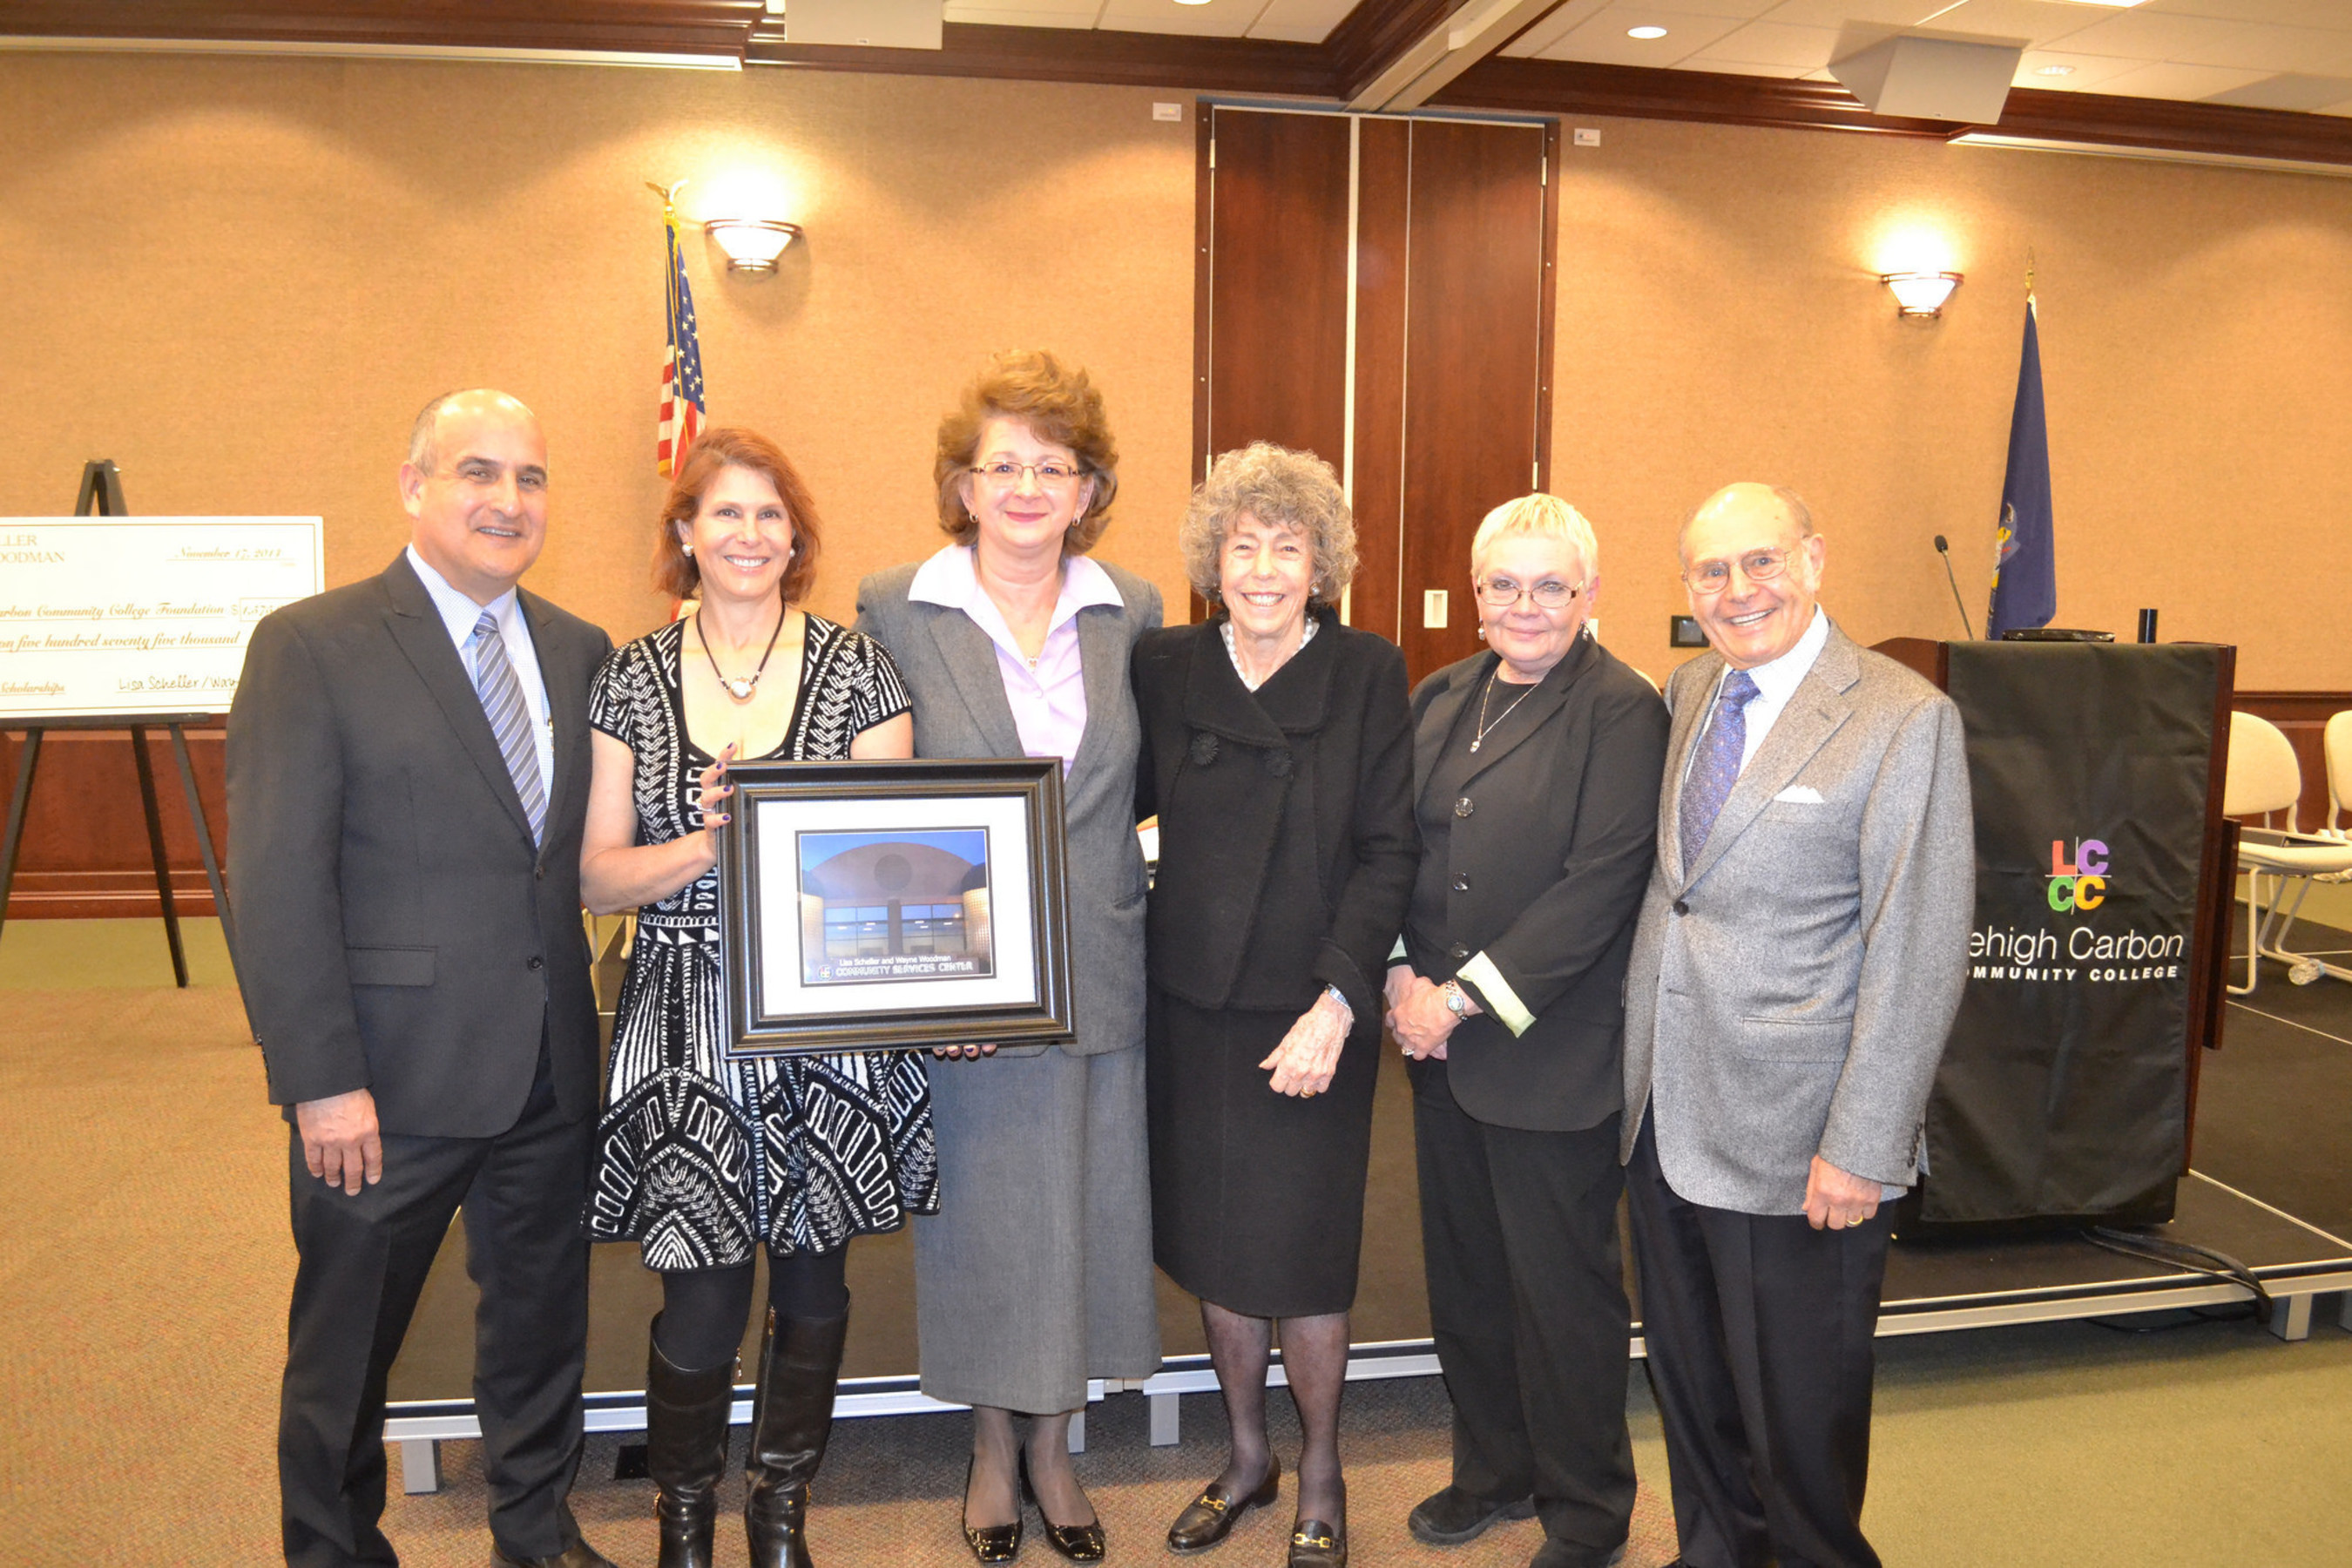 From left to right; Wayne Woodman, Lisa Scheller, Dr. Ann D. Bieber of Lehigh Carbon Community College, Roberta Scheller, Ellen Kern of Chief of Staff for State Senator Pat Browne and the Chair of the LCCC Foundation Board of Directors, and Ernest Scheller.